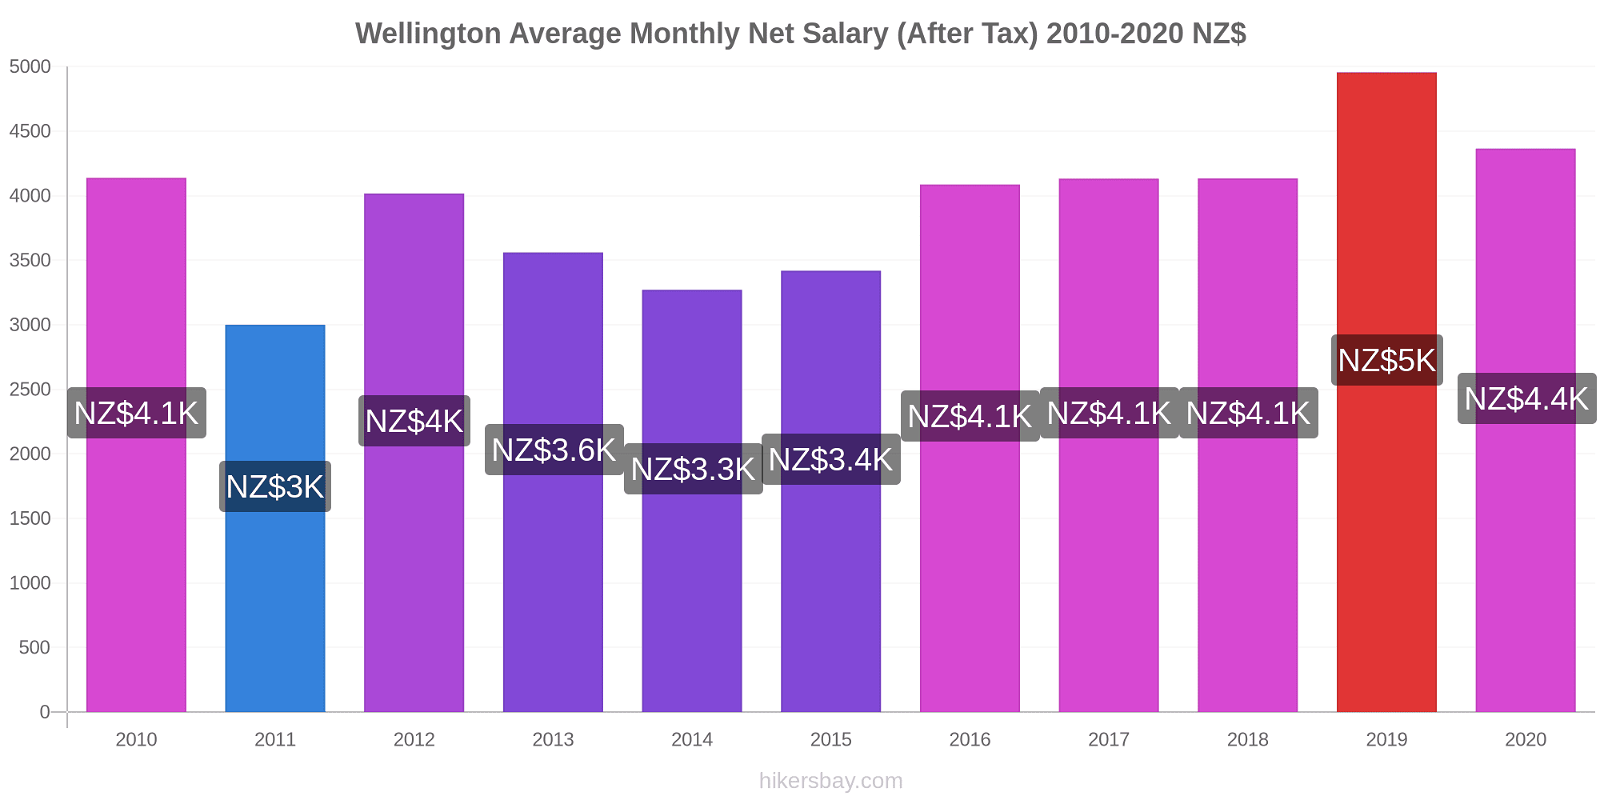 Wellington price changes Average Monthly Net Salary (After Tax) hikersbay.com